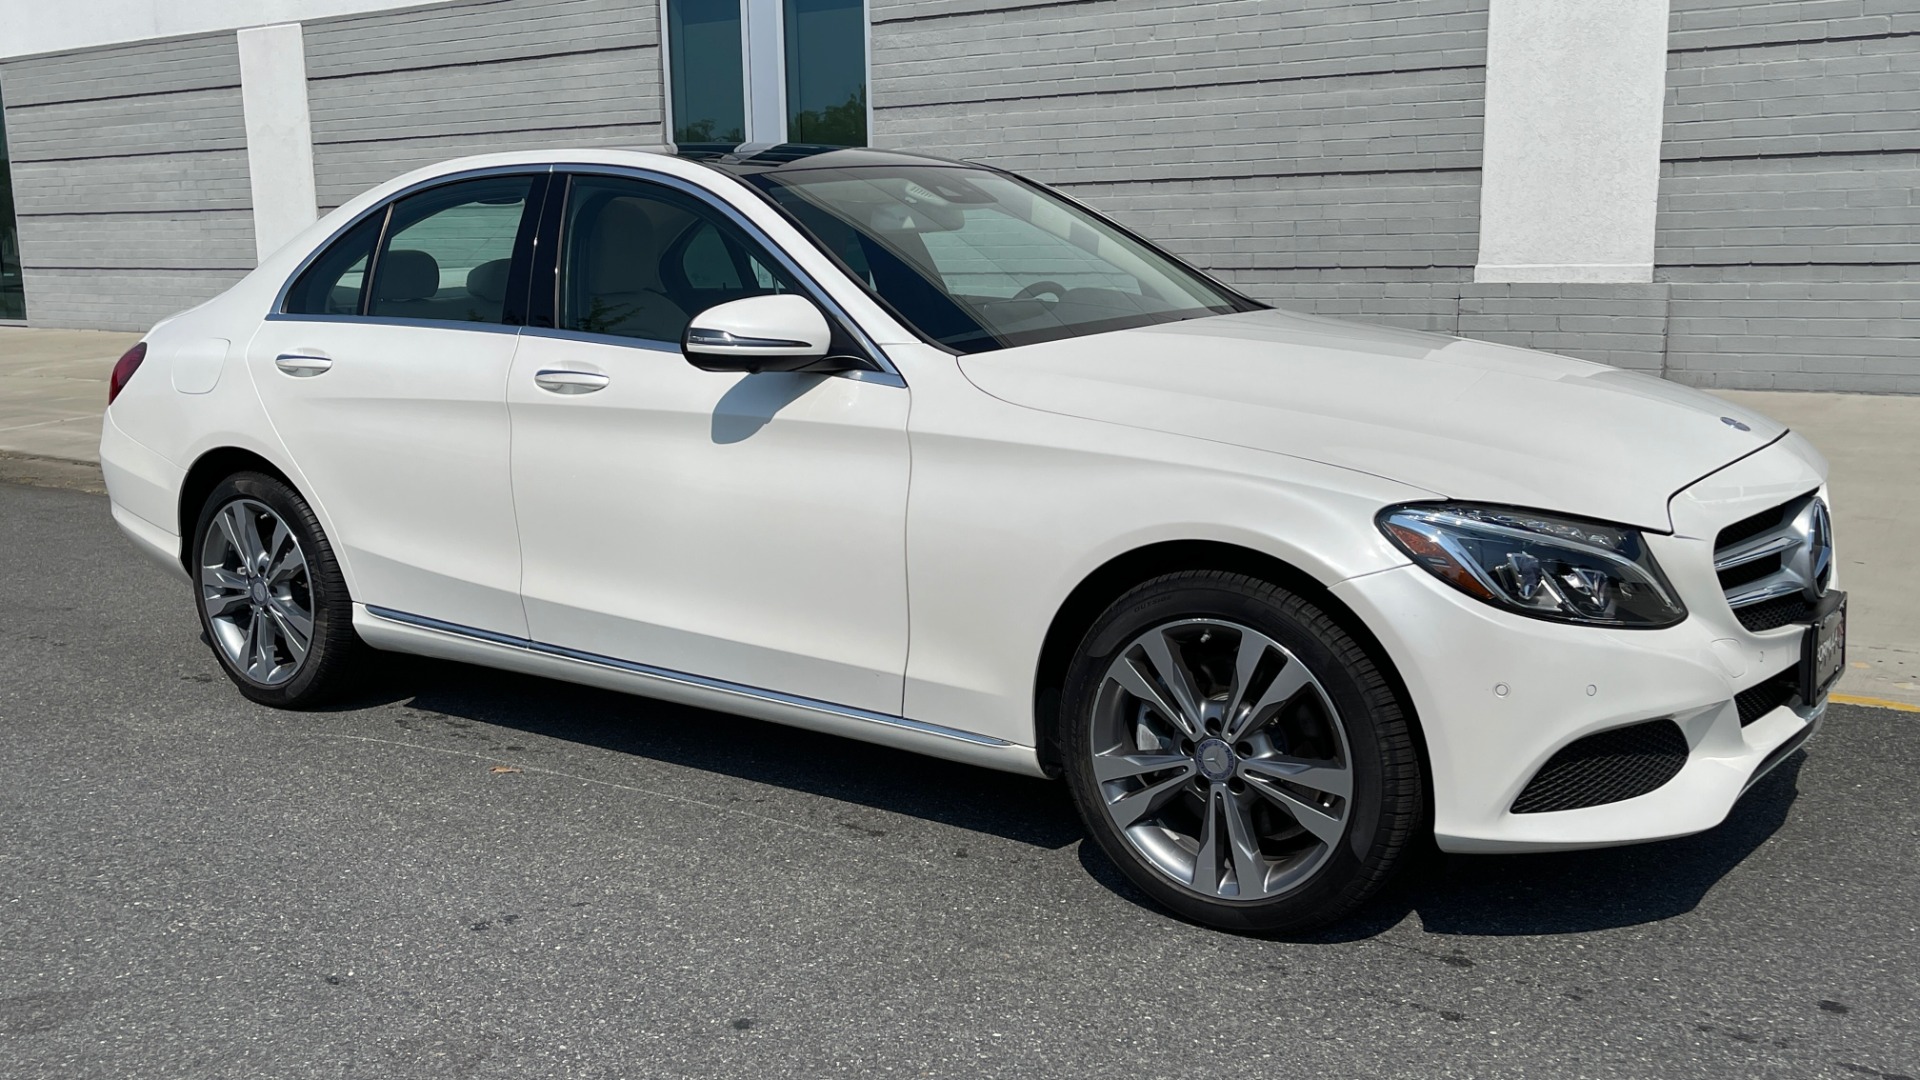 Used 2016 Mercedes-Benz C-CLASS C 300 4MATIC PREMIUM / BSA / MULTI MEDIA PKG / LIGHTING / REARVIEW for sale Sold at Formula Imports in Charlotte NC 28227 7